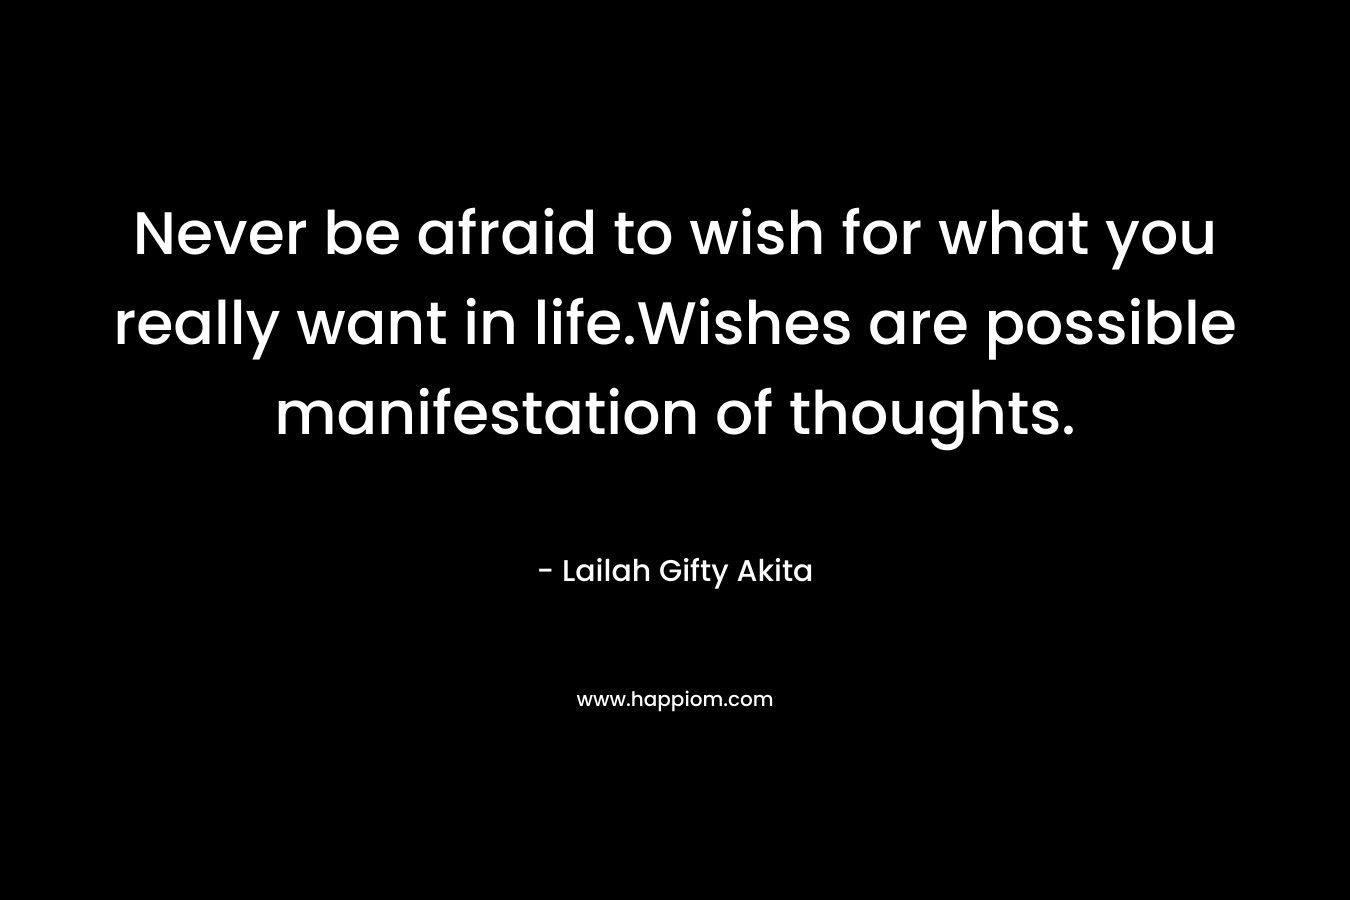 Never be afraid to wish for what you really want in life.Wishes are possible manifestation of thoughts.